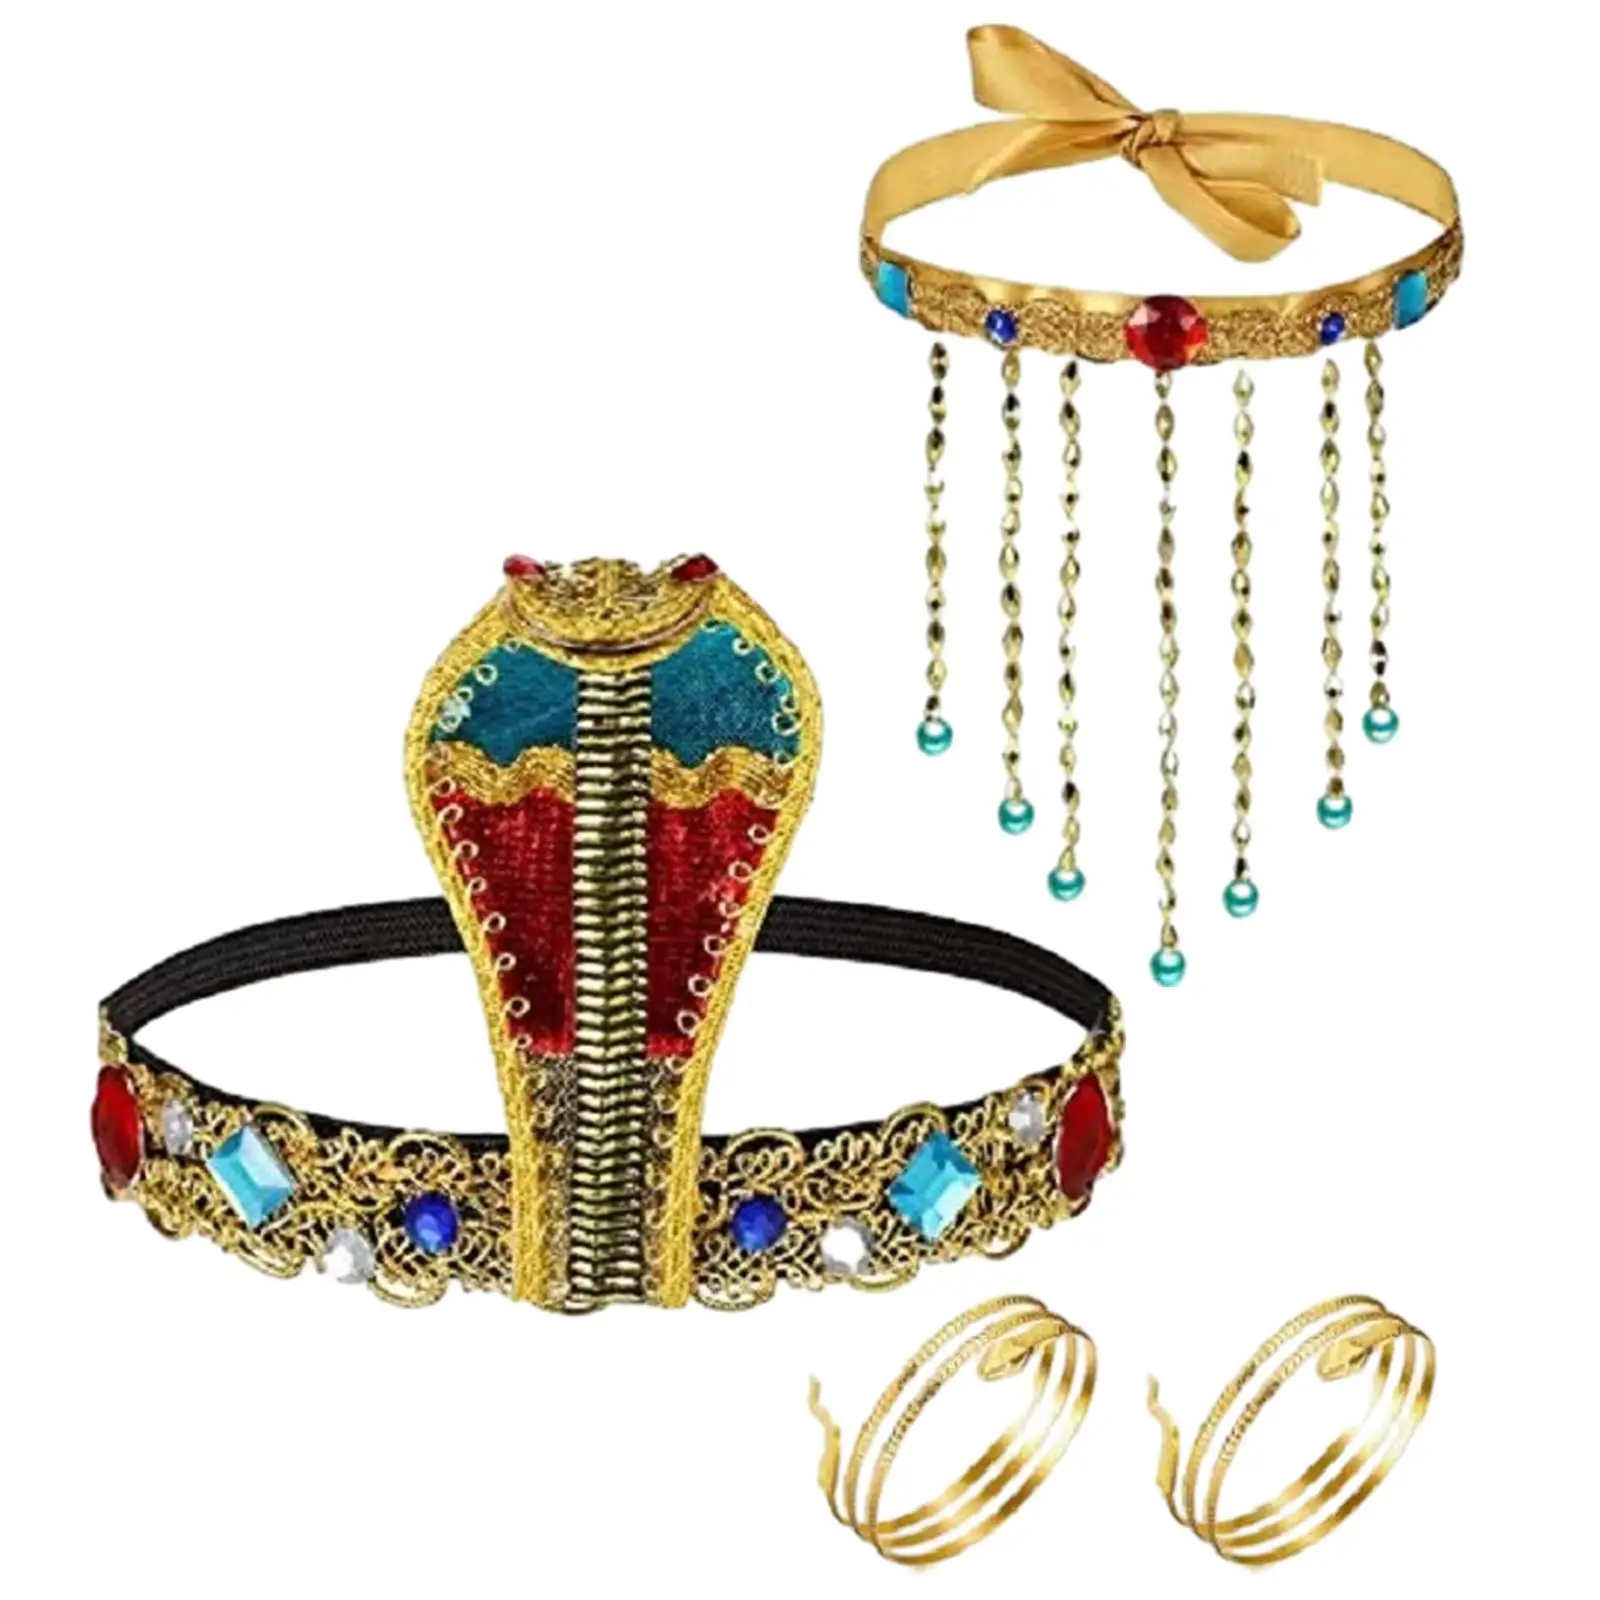 

4 Pieces Women's Egyptian Costume Accessories Snake Beaded Headband for Fancy Dress Party Cosplay Stage Performance Festivals